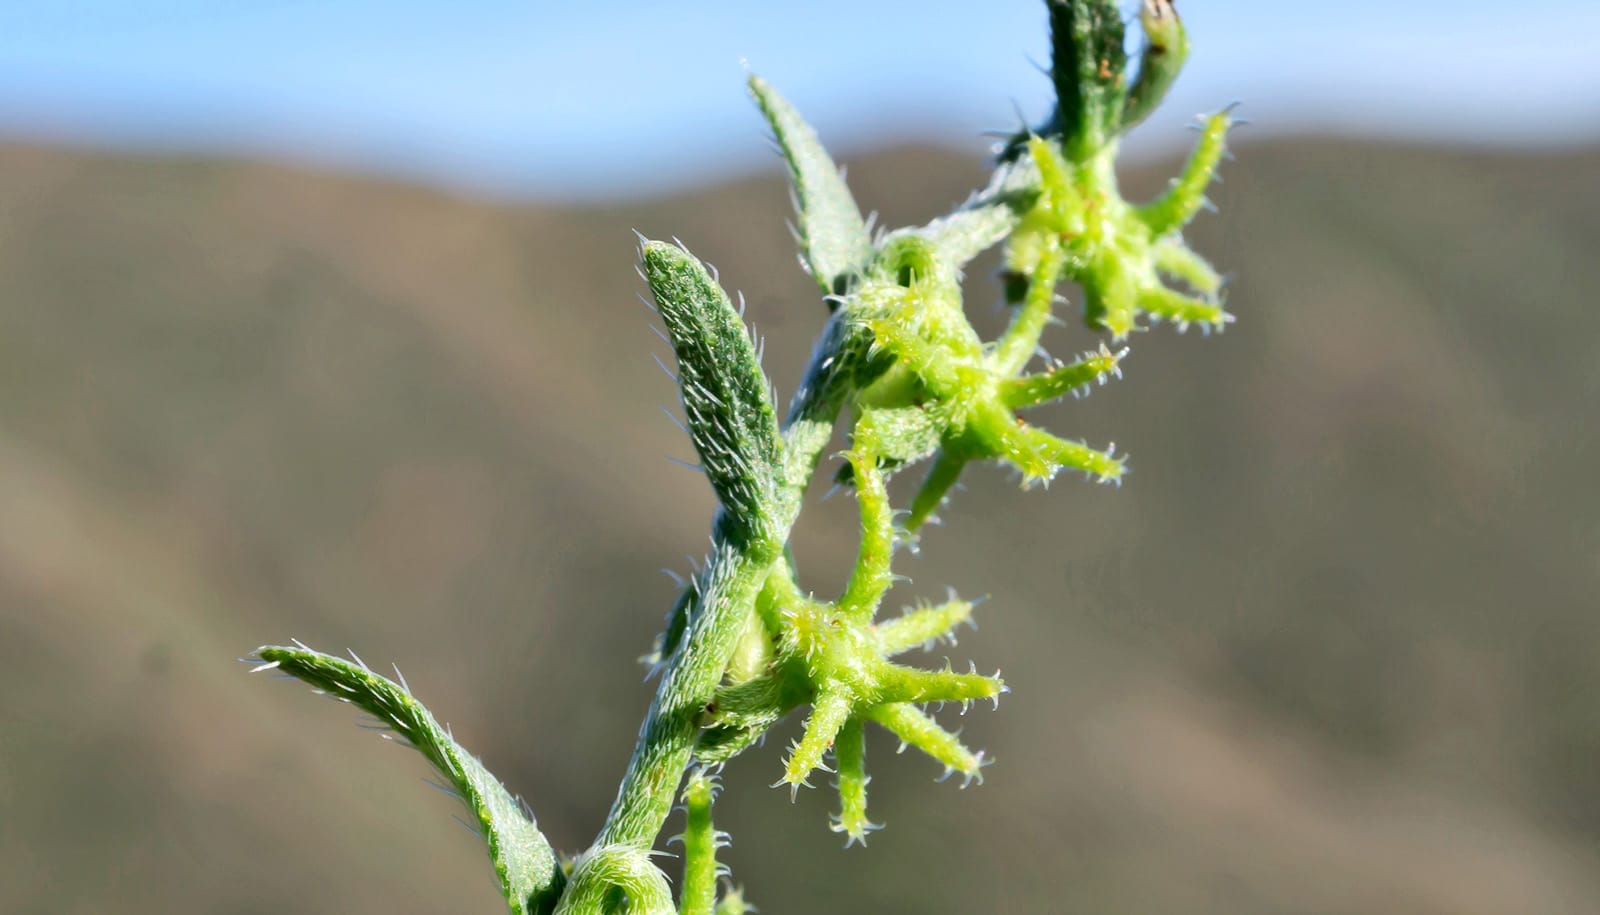 stalk of plant with spiny burrs